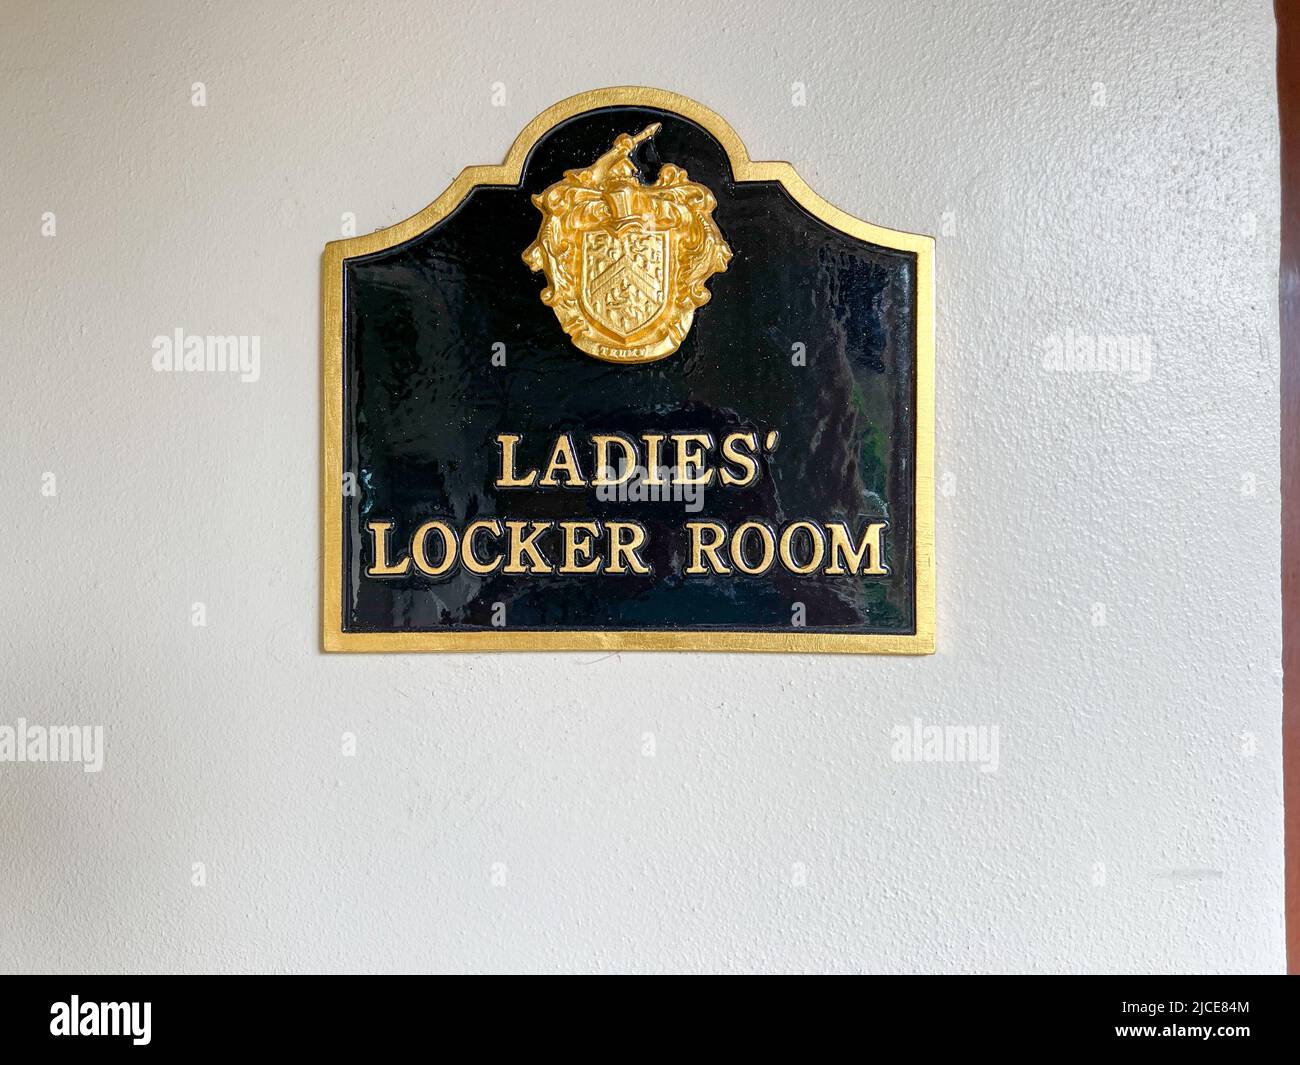 Jupiter, FL USA - May 31, 2022:  The Ladies Locker Room sign at the Trump National Golf Course club House in Jupiter, Florida. Stock Photo